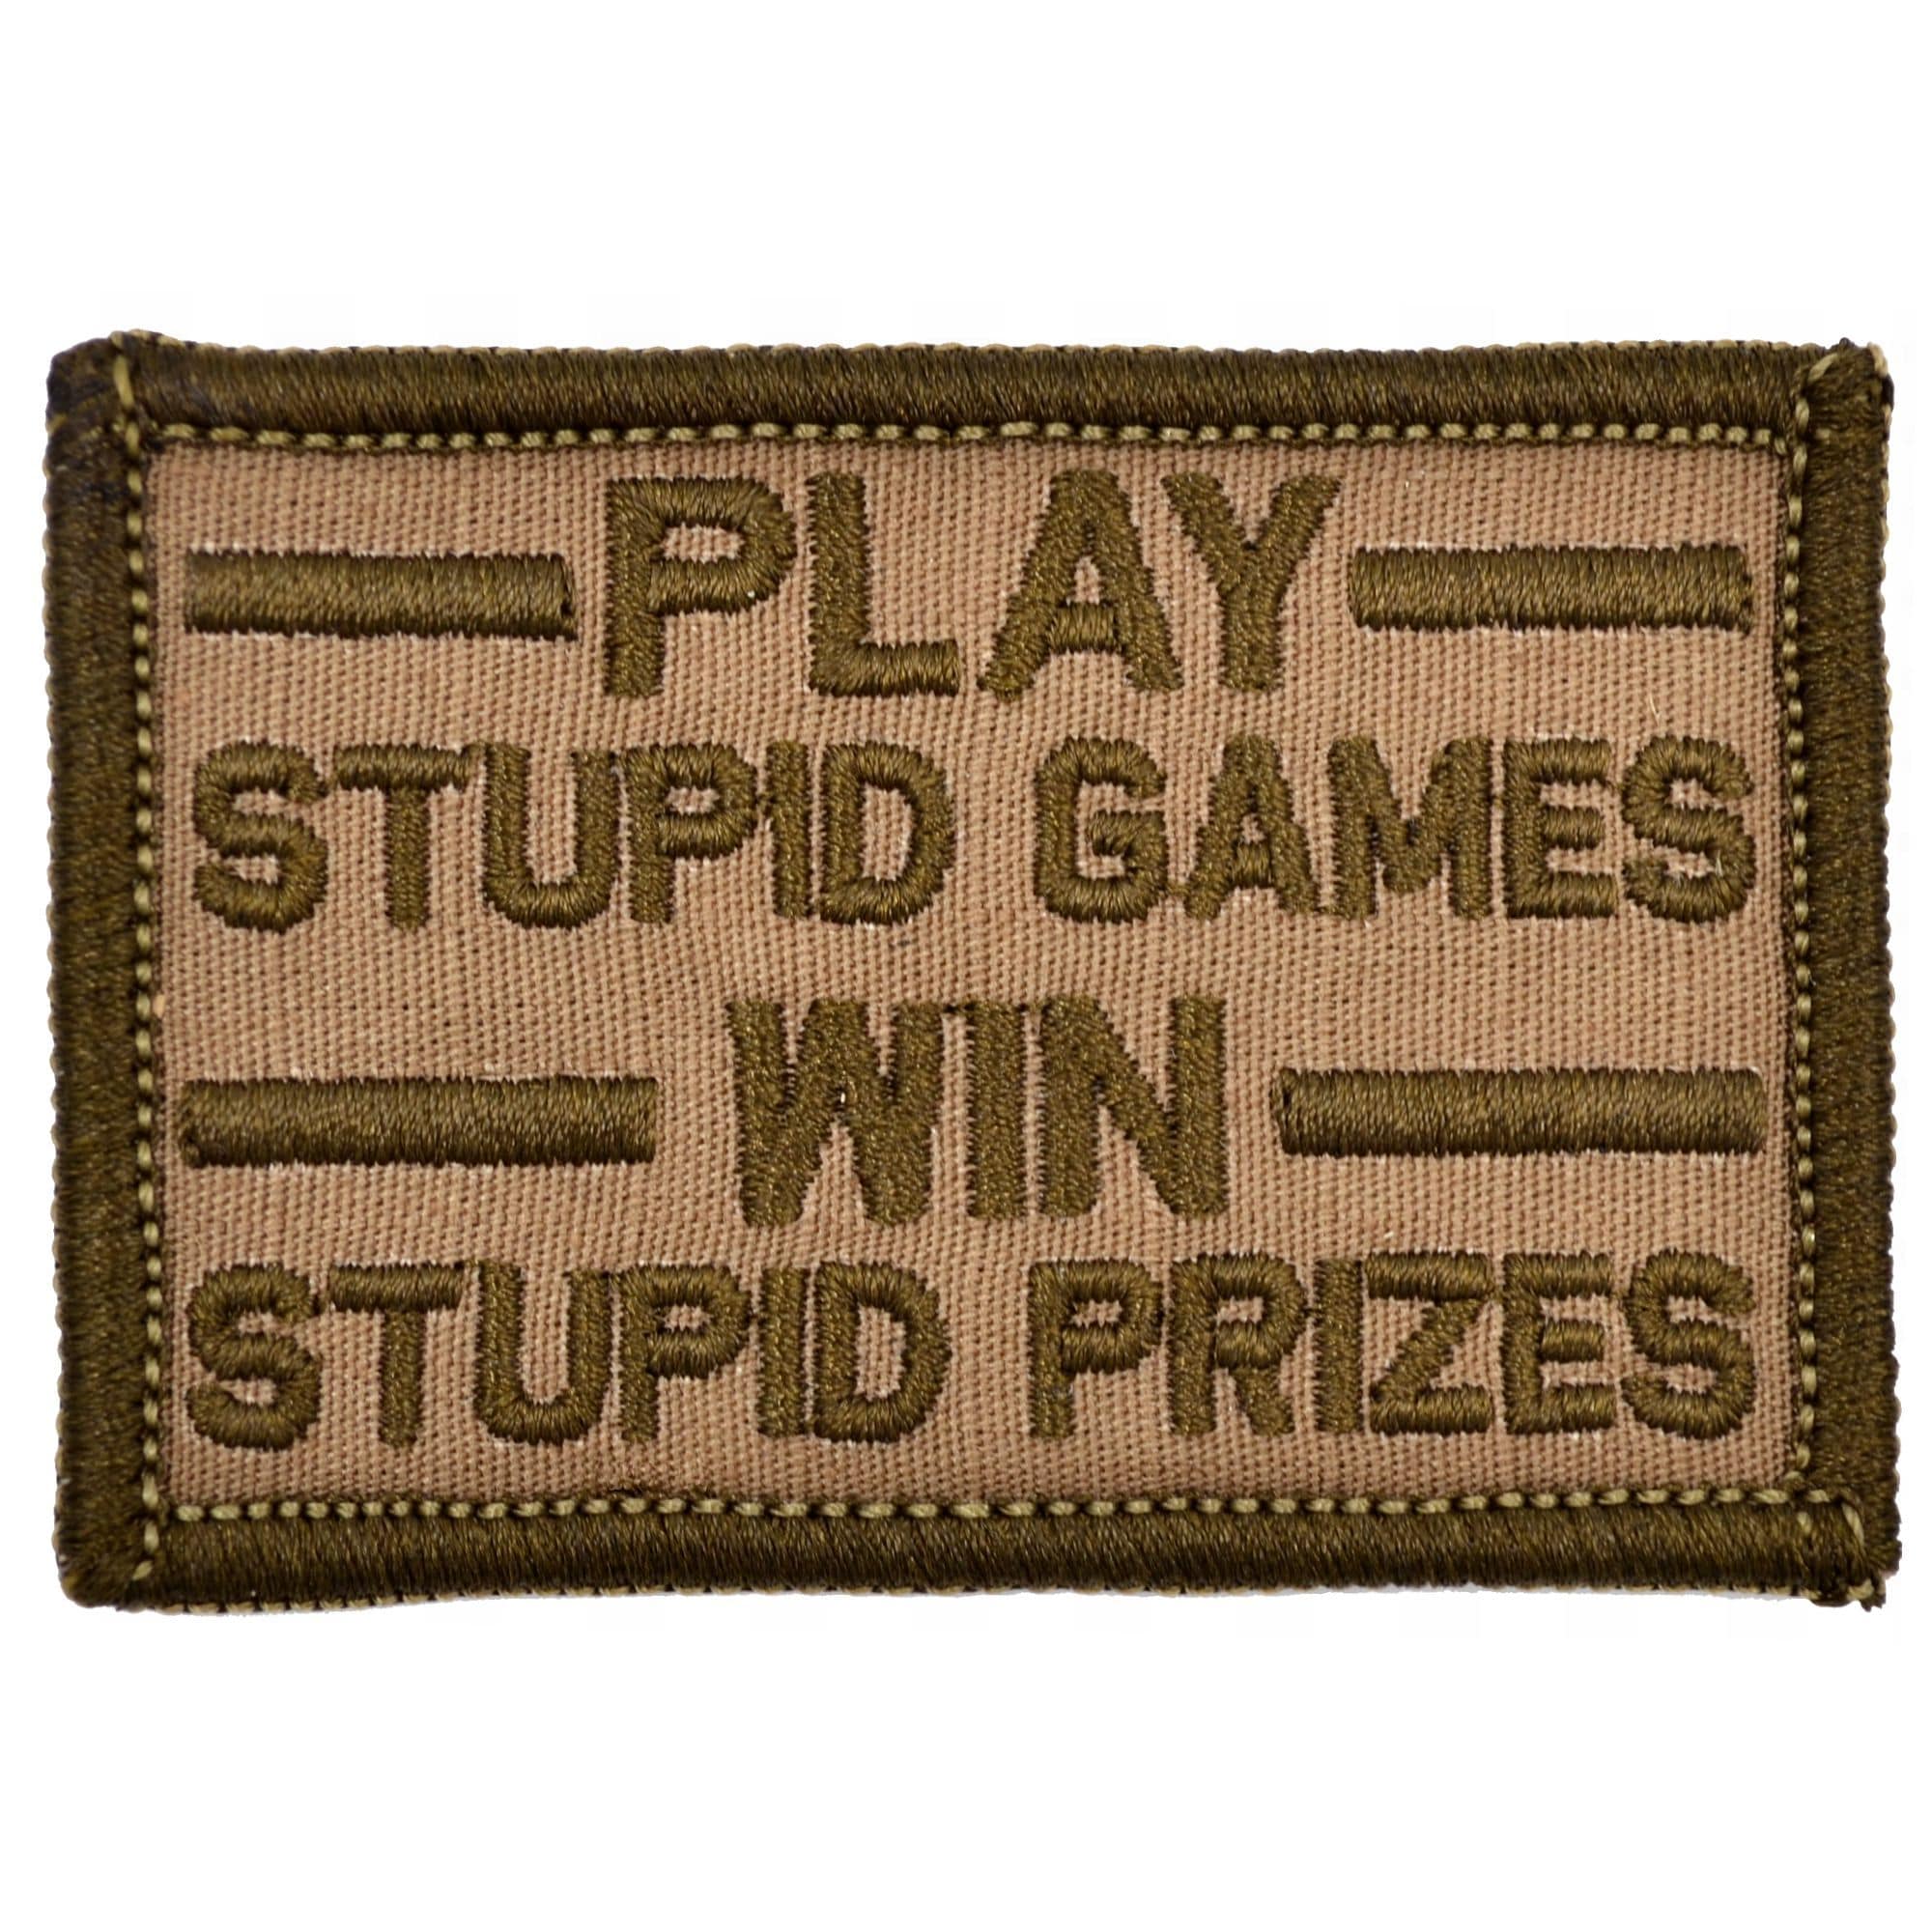 Tactical Gear Junkie Patches Coyote Brown Play Stupid Games, Win Stupid Prizes - 2x3 Patch